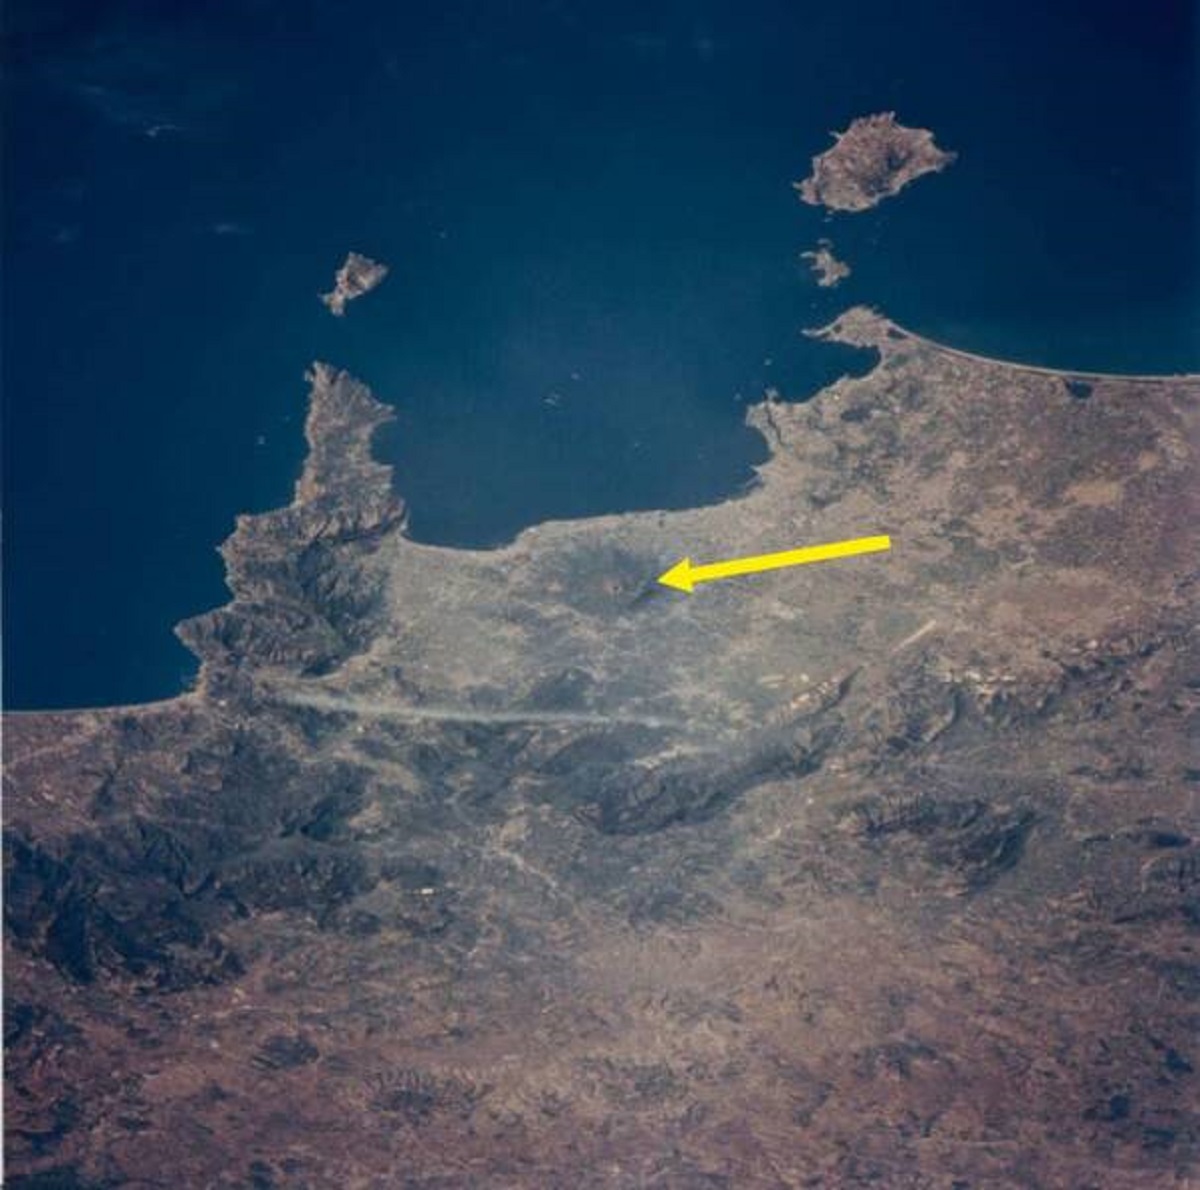 See that little hole there? This is what Mount Vesuvius looks like from space: